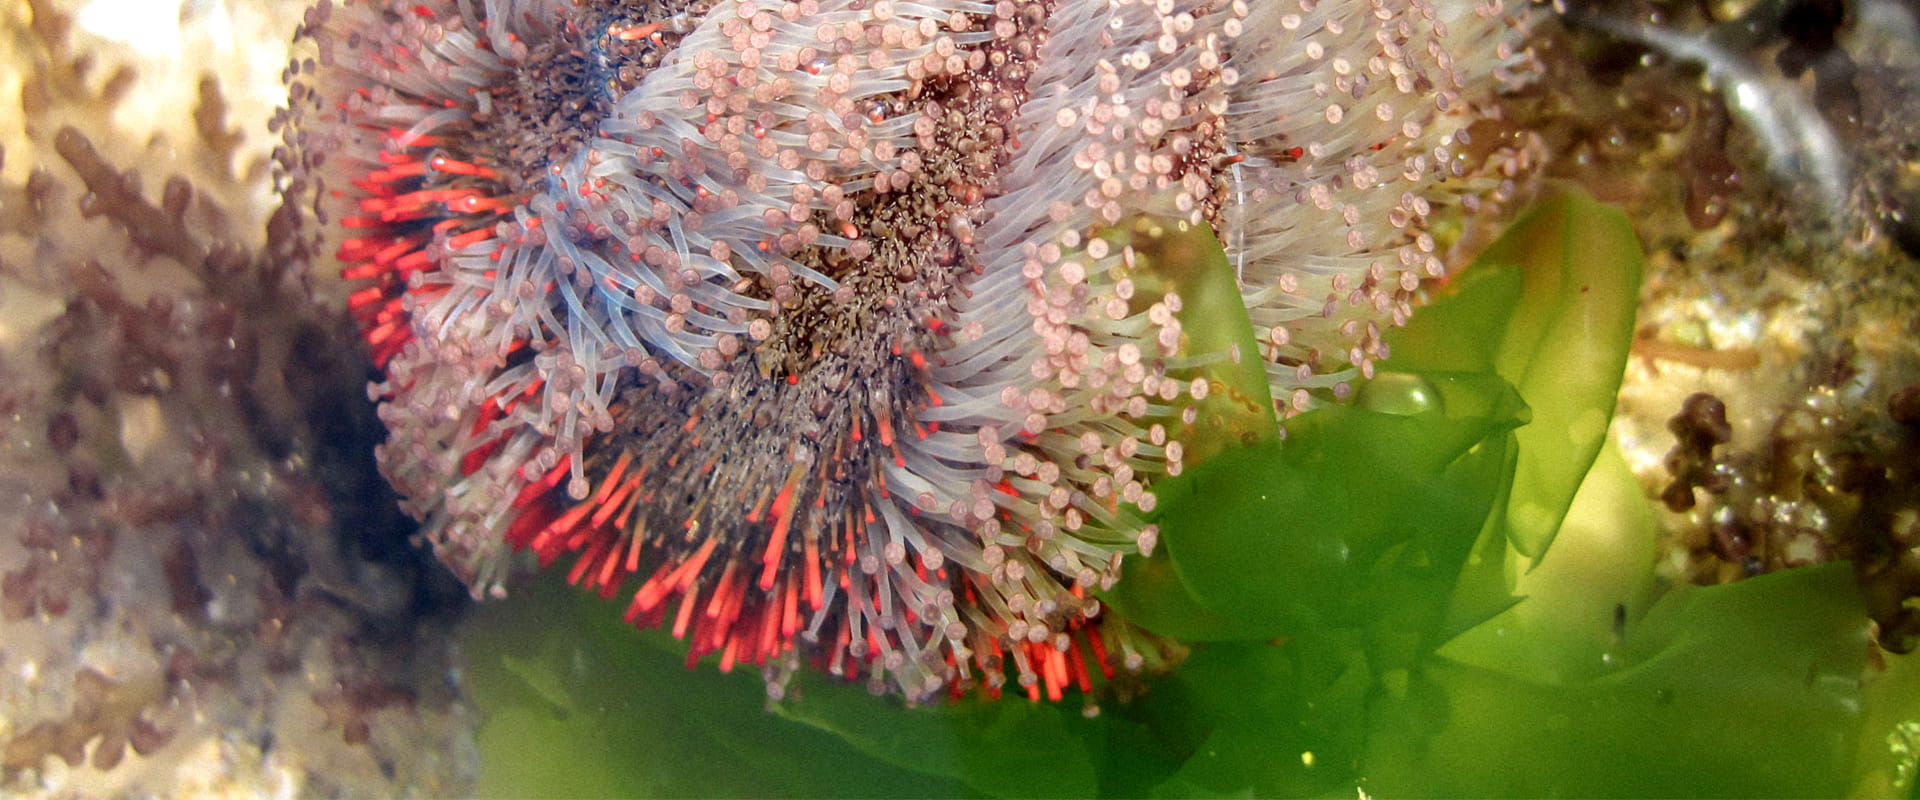 An underwater image of a Red-spined Urchin amongst  green Sea Lettuce.